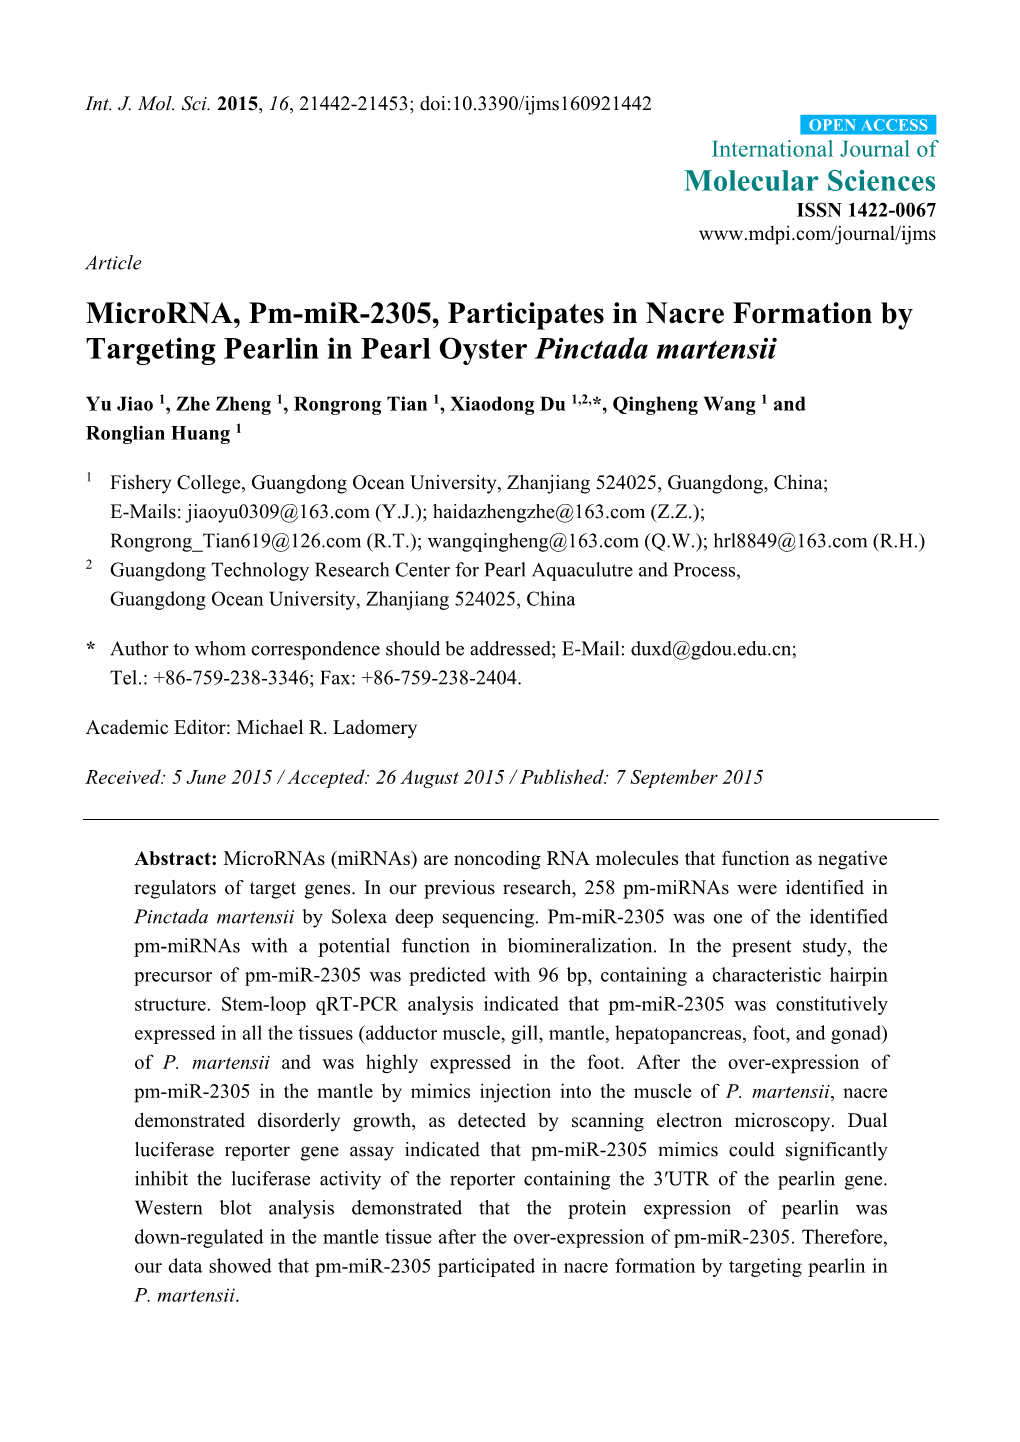 Microrna, Pm-Mir-2305, Participates in Nacre Formation by Targeting Pearlin in Pearl Oyster Pinctada Martensii